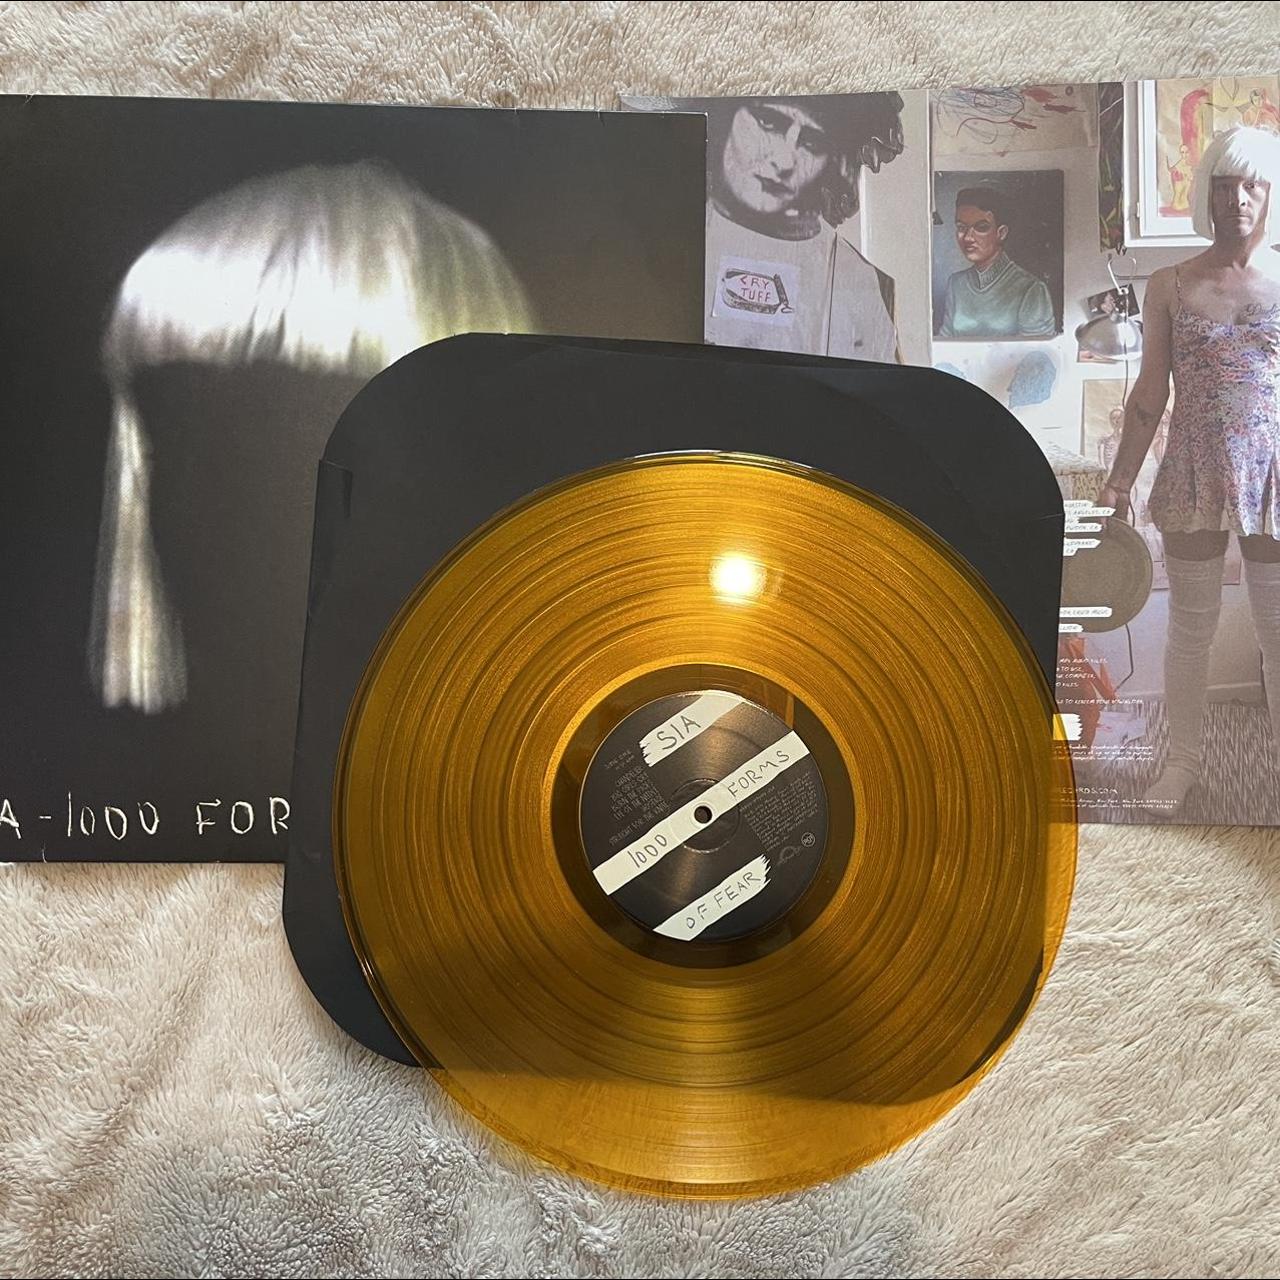 SIA 1000 Forms of Fear vinyl, limited edition gold